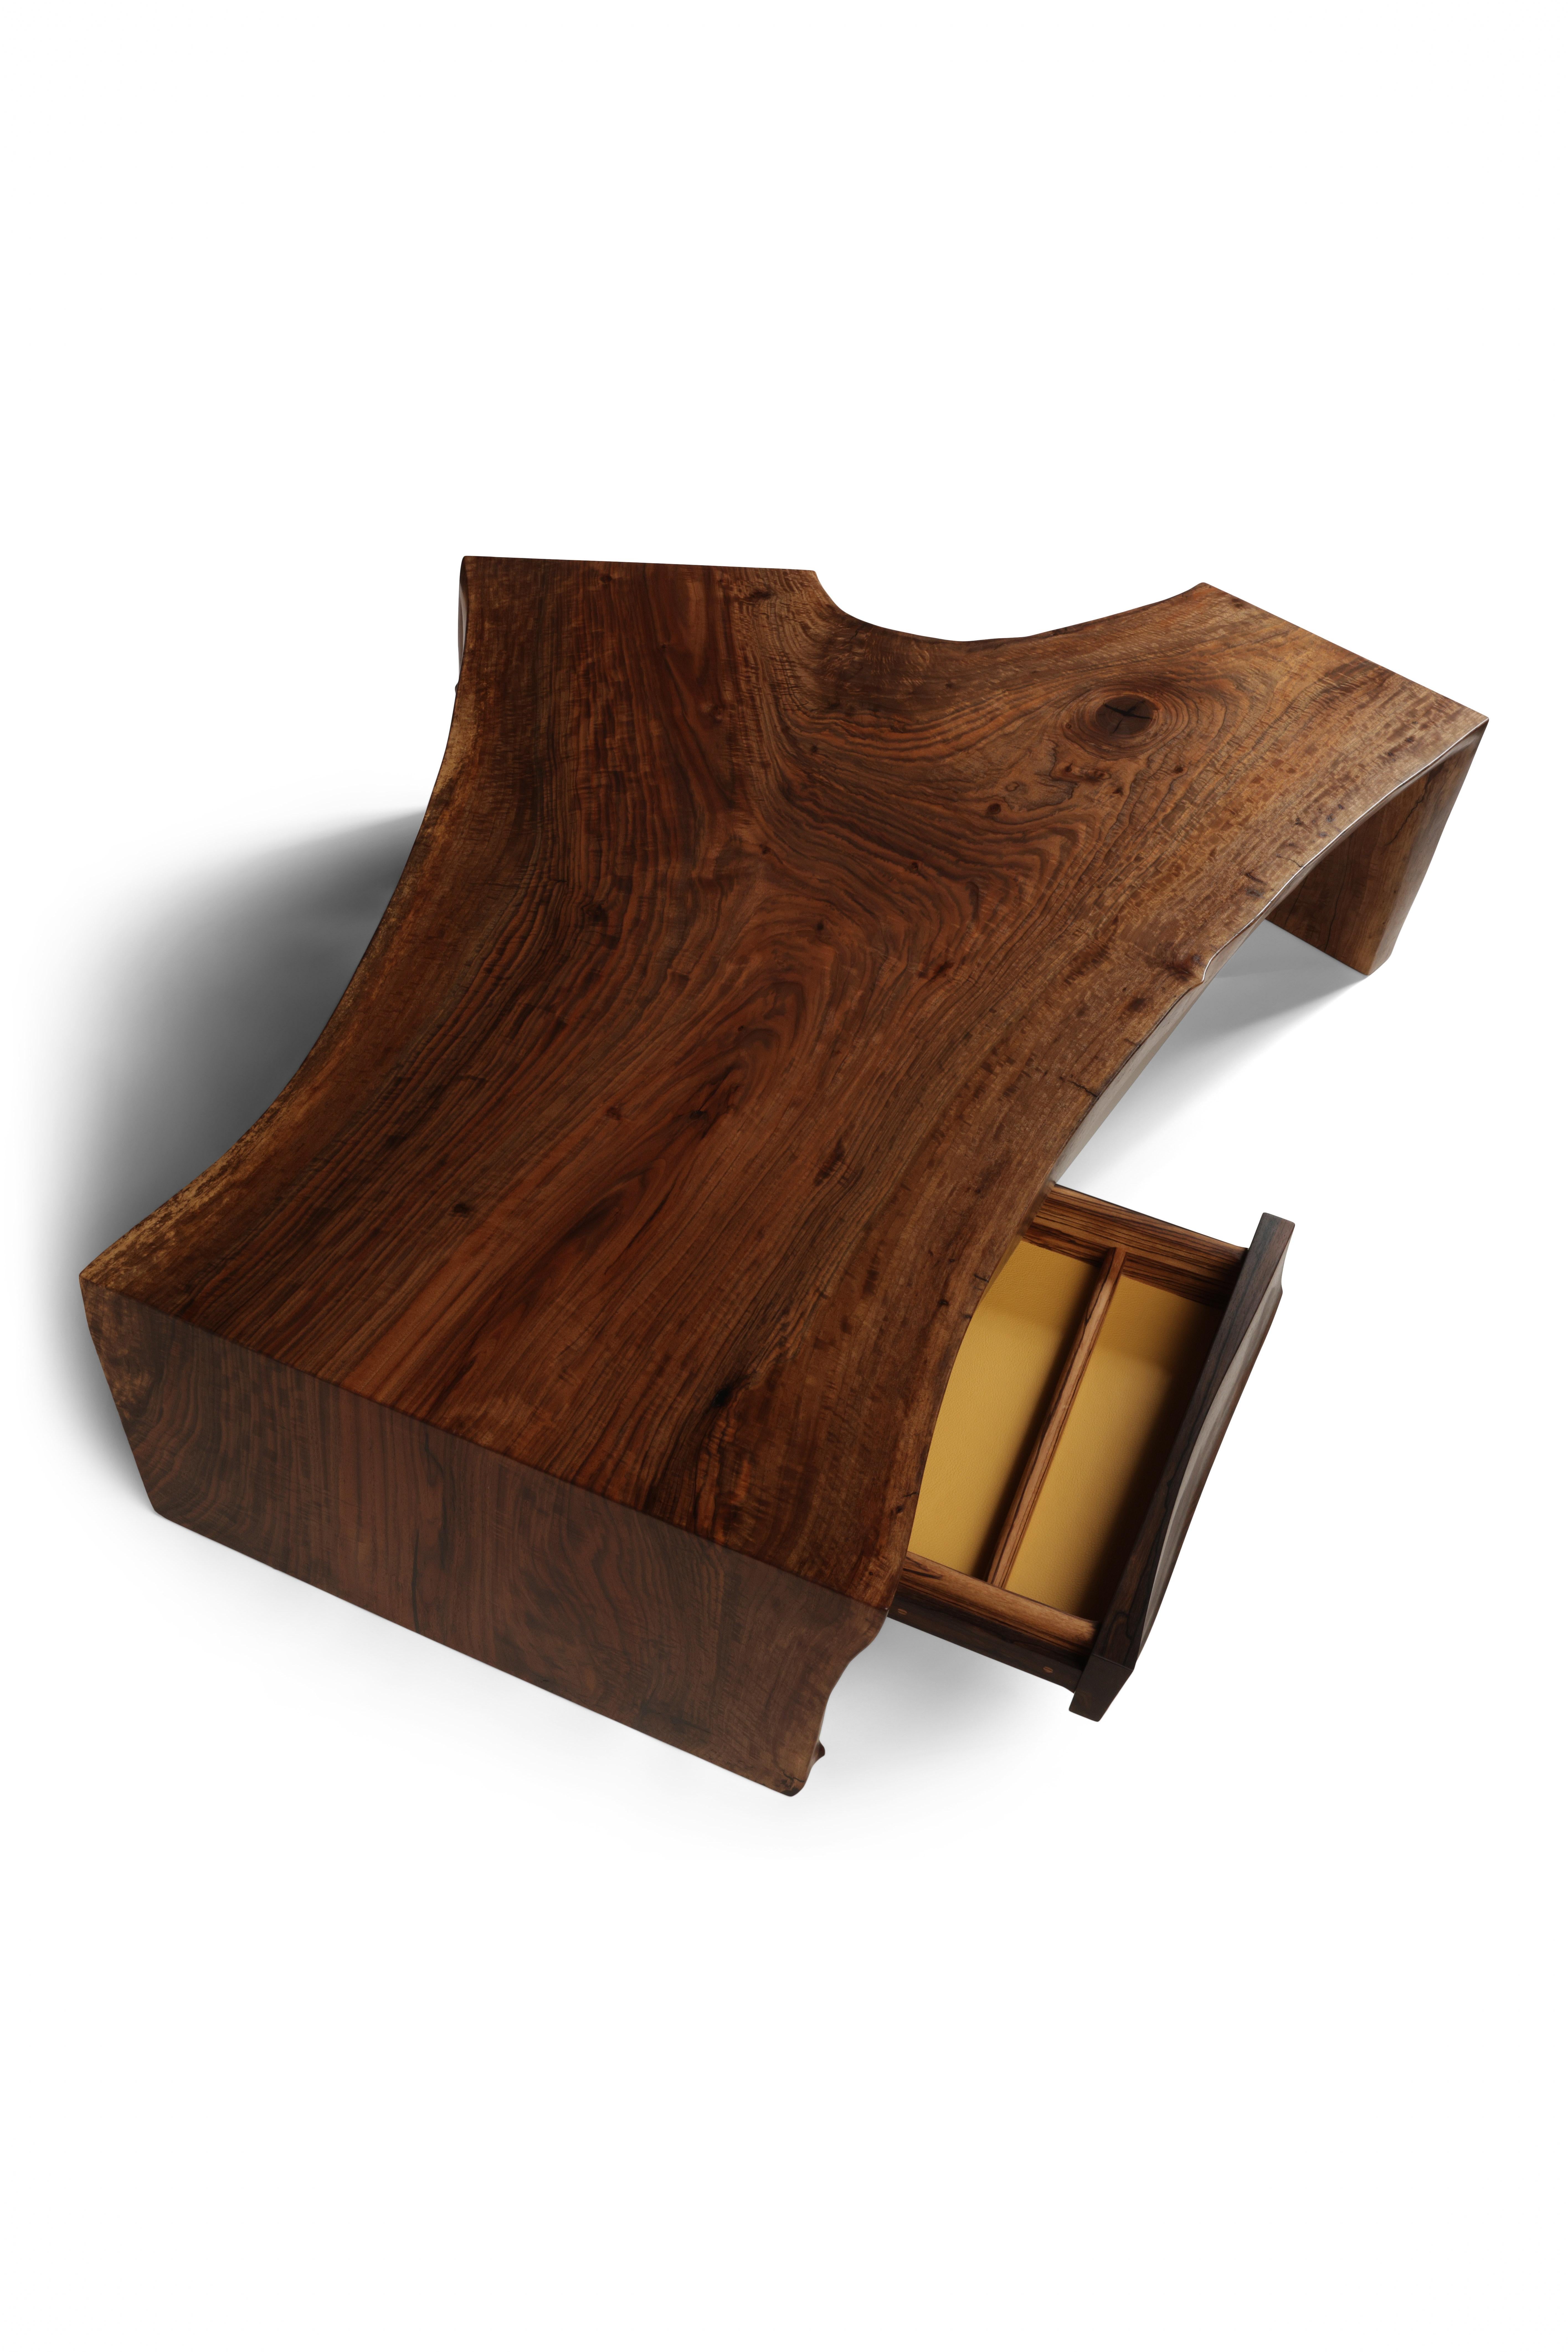 A single slab of figured Bastogne Walnut folded to create a waterfall effect over the ends of the table. An organically sculpted drawer is seamlessly tucked away into one corner.  The drawer front carved in decadent Ziracote accented by a Zebrano